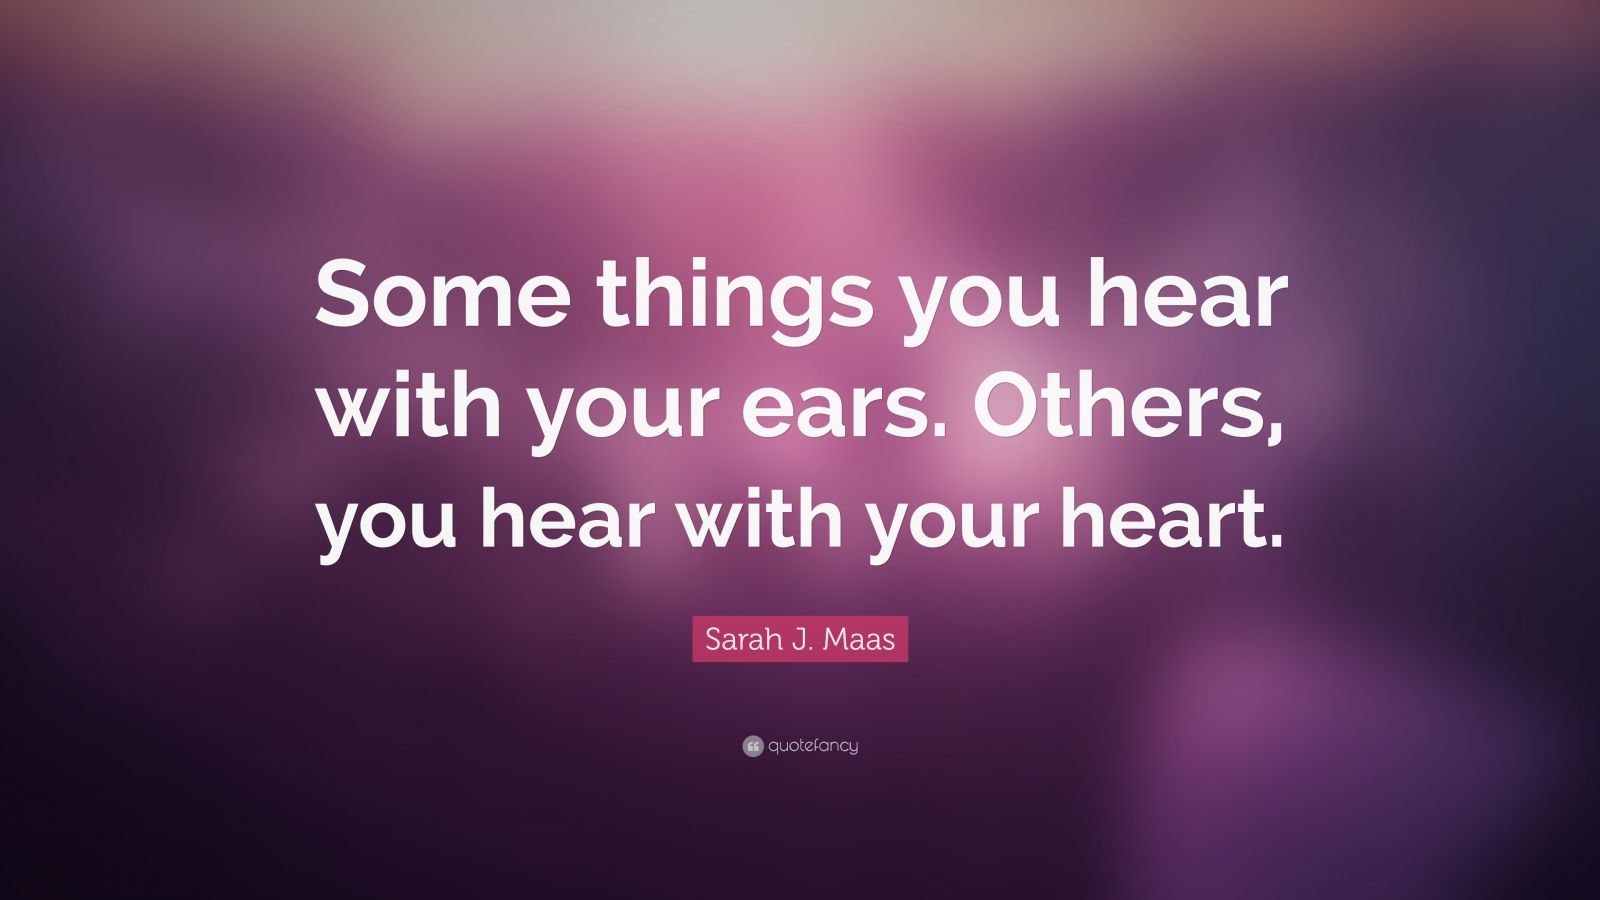 Sarah J. Maas Quote: “Some things you hear with your ears. Others, you ...